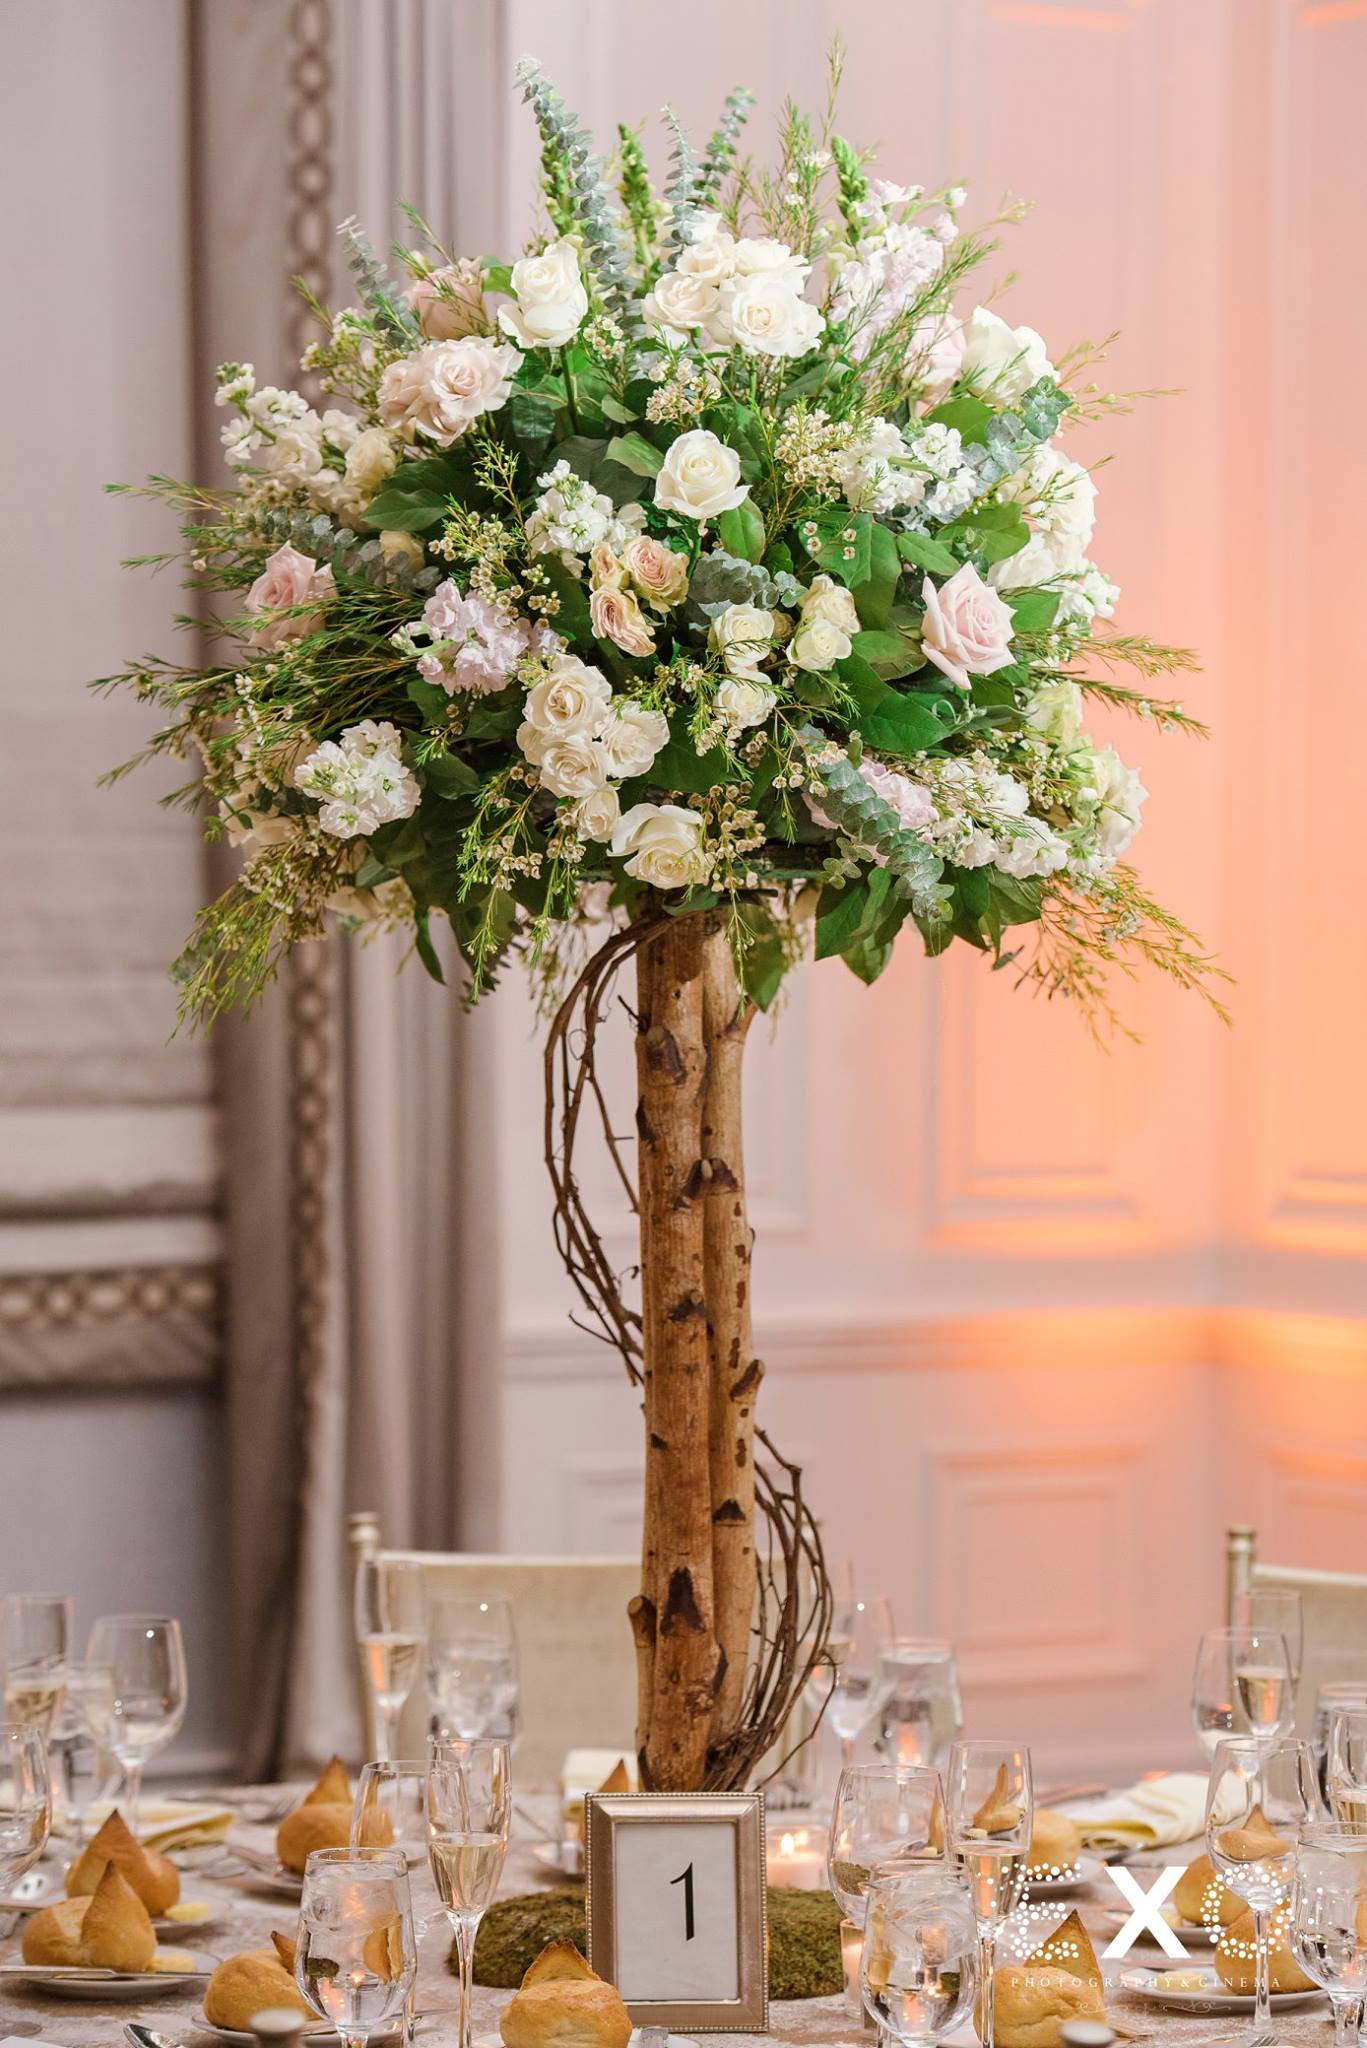 beautiful floral table arrangement created by United Floral